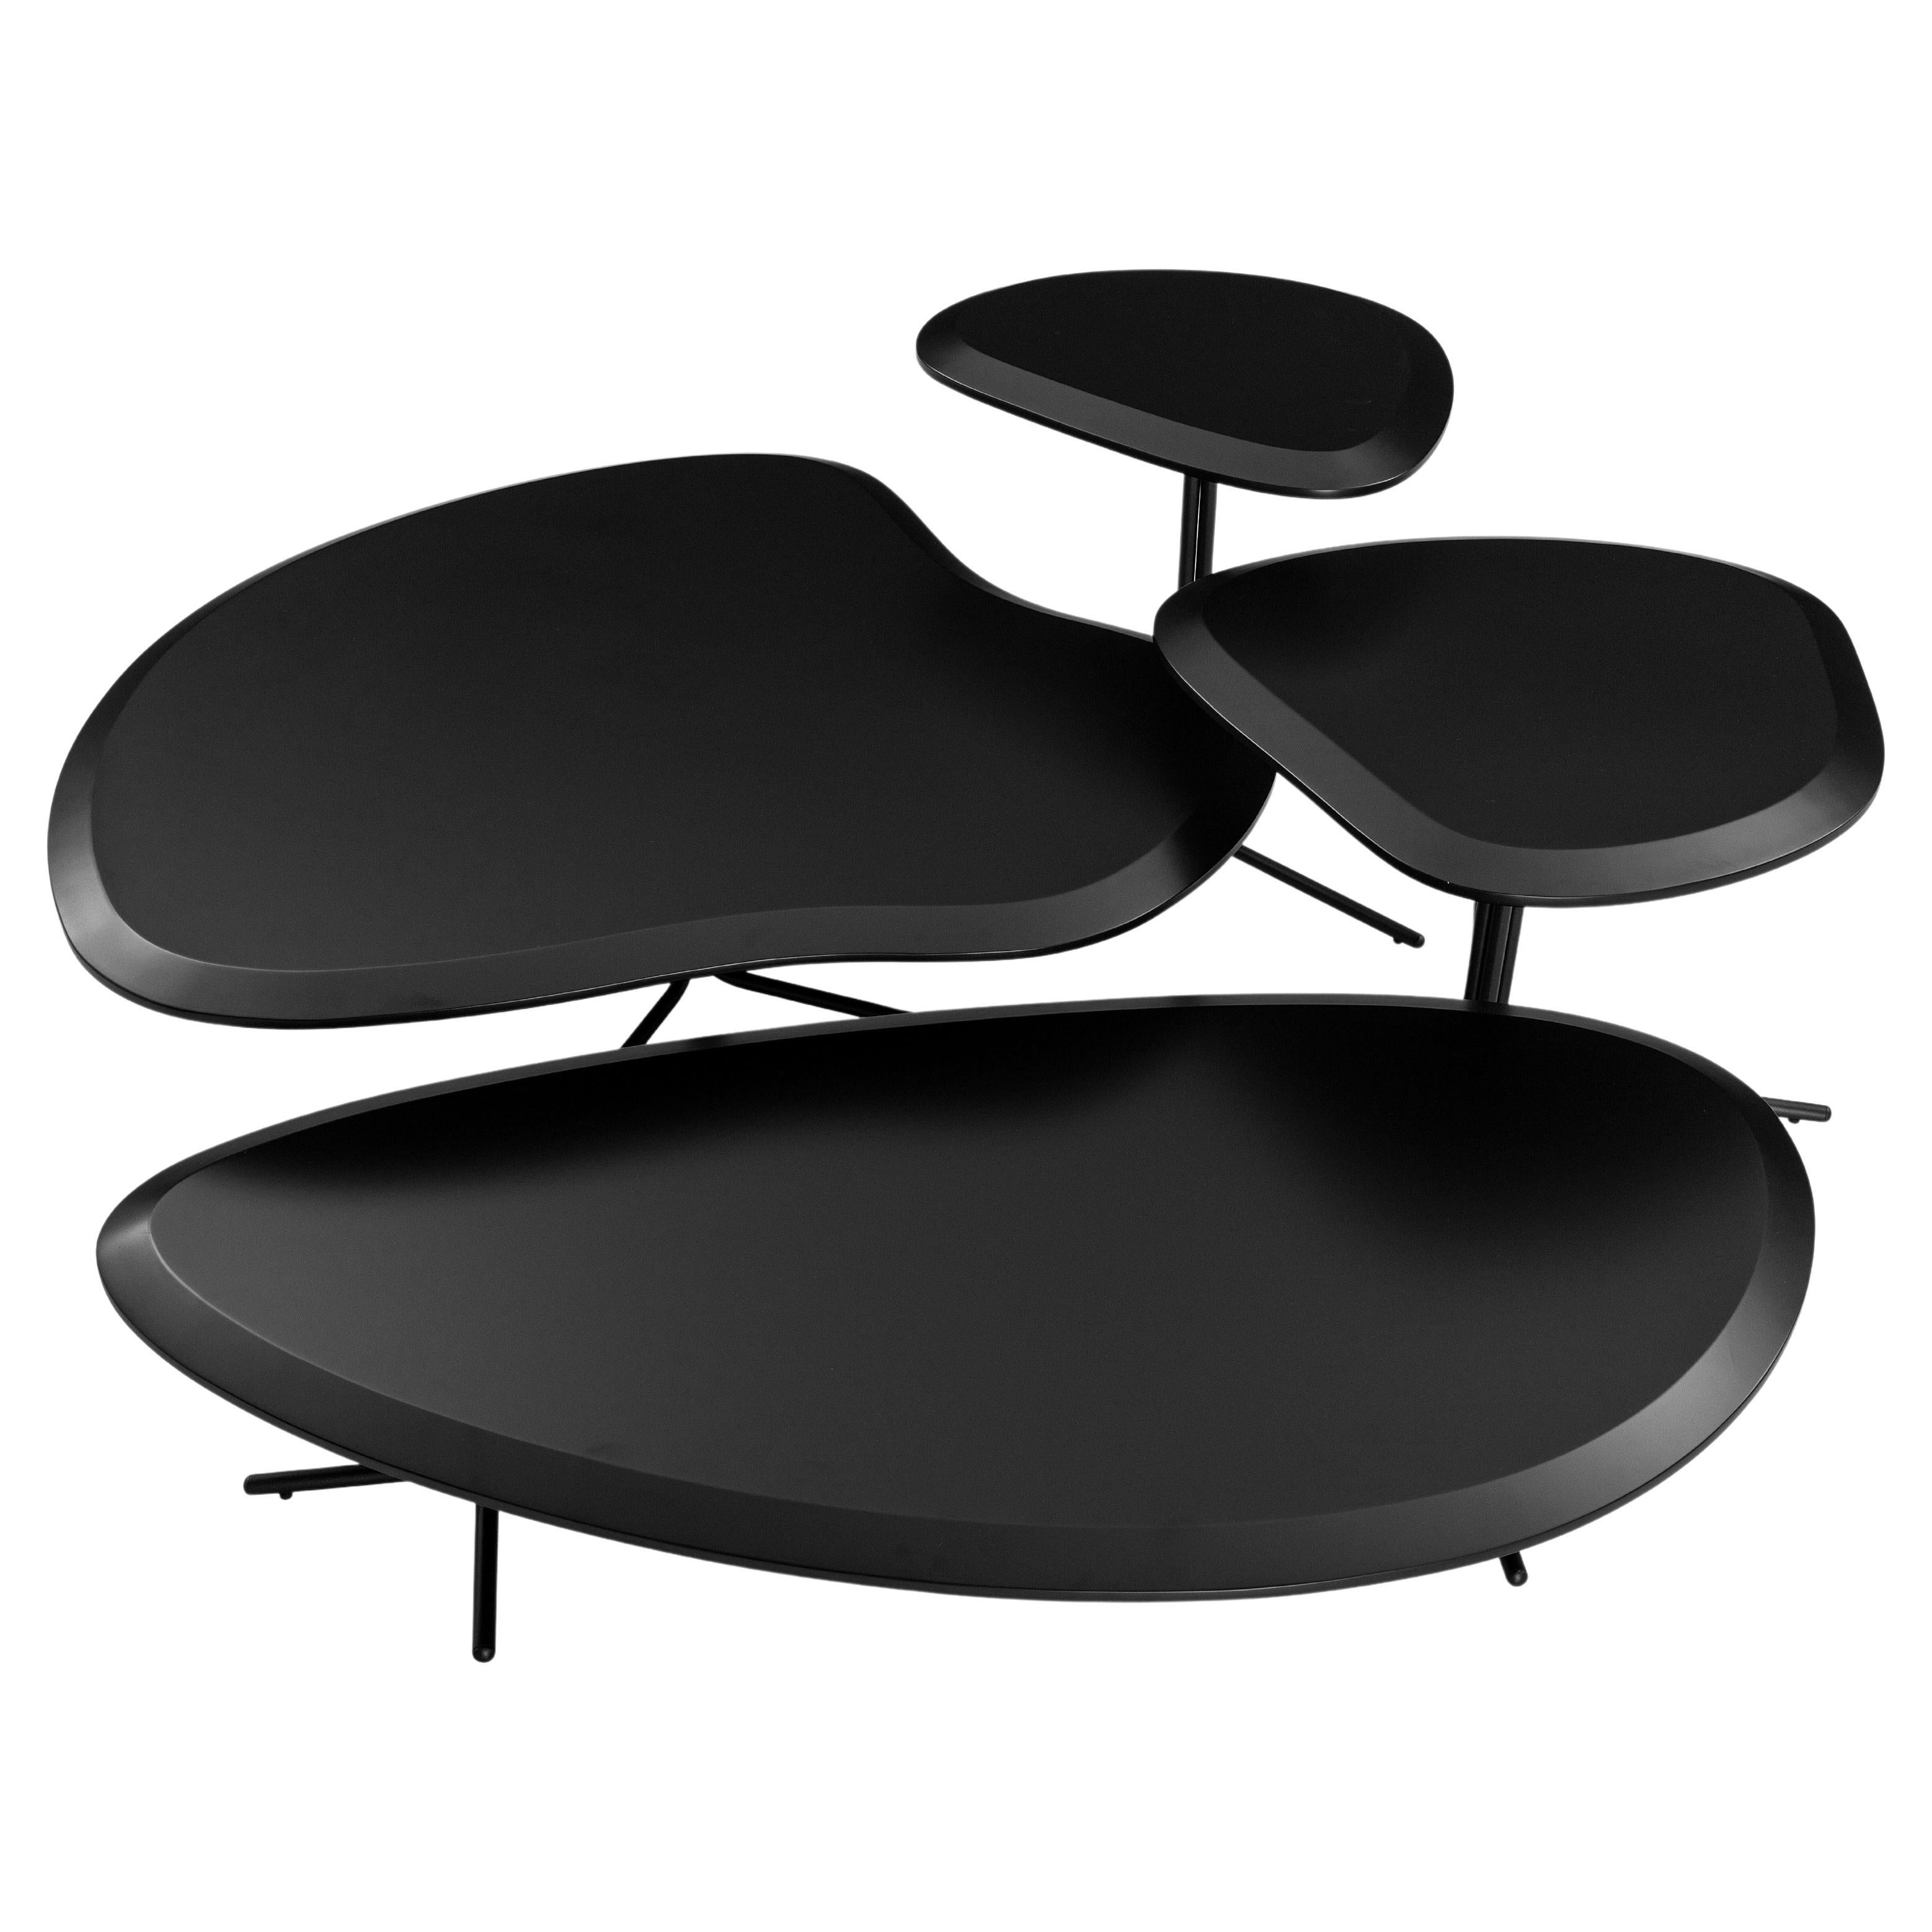 Pante Coffee Table in Black Wood Finish and Black Legs, Set of 4